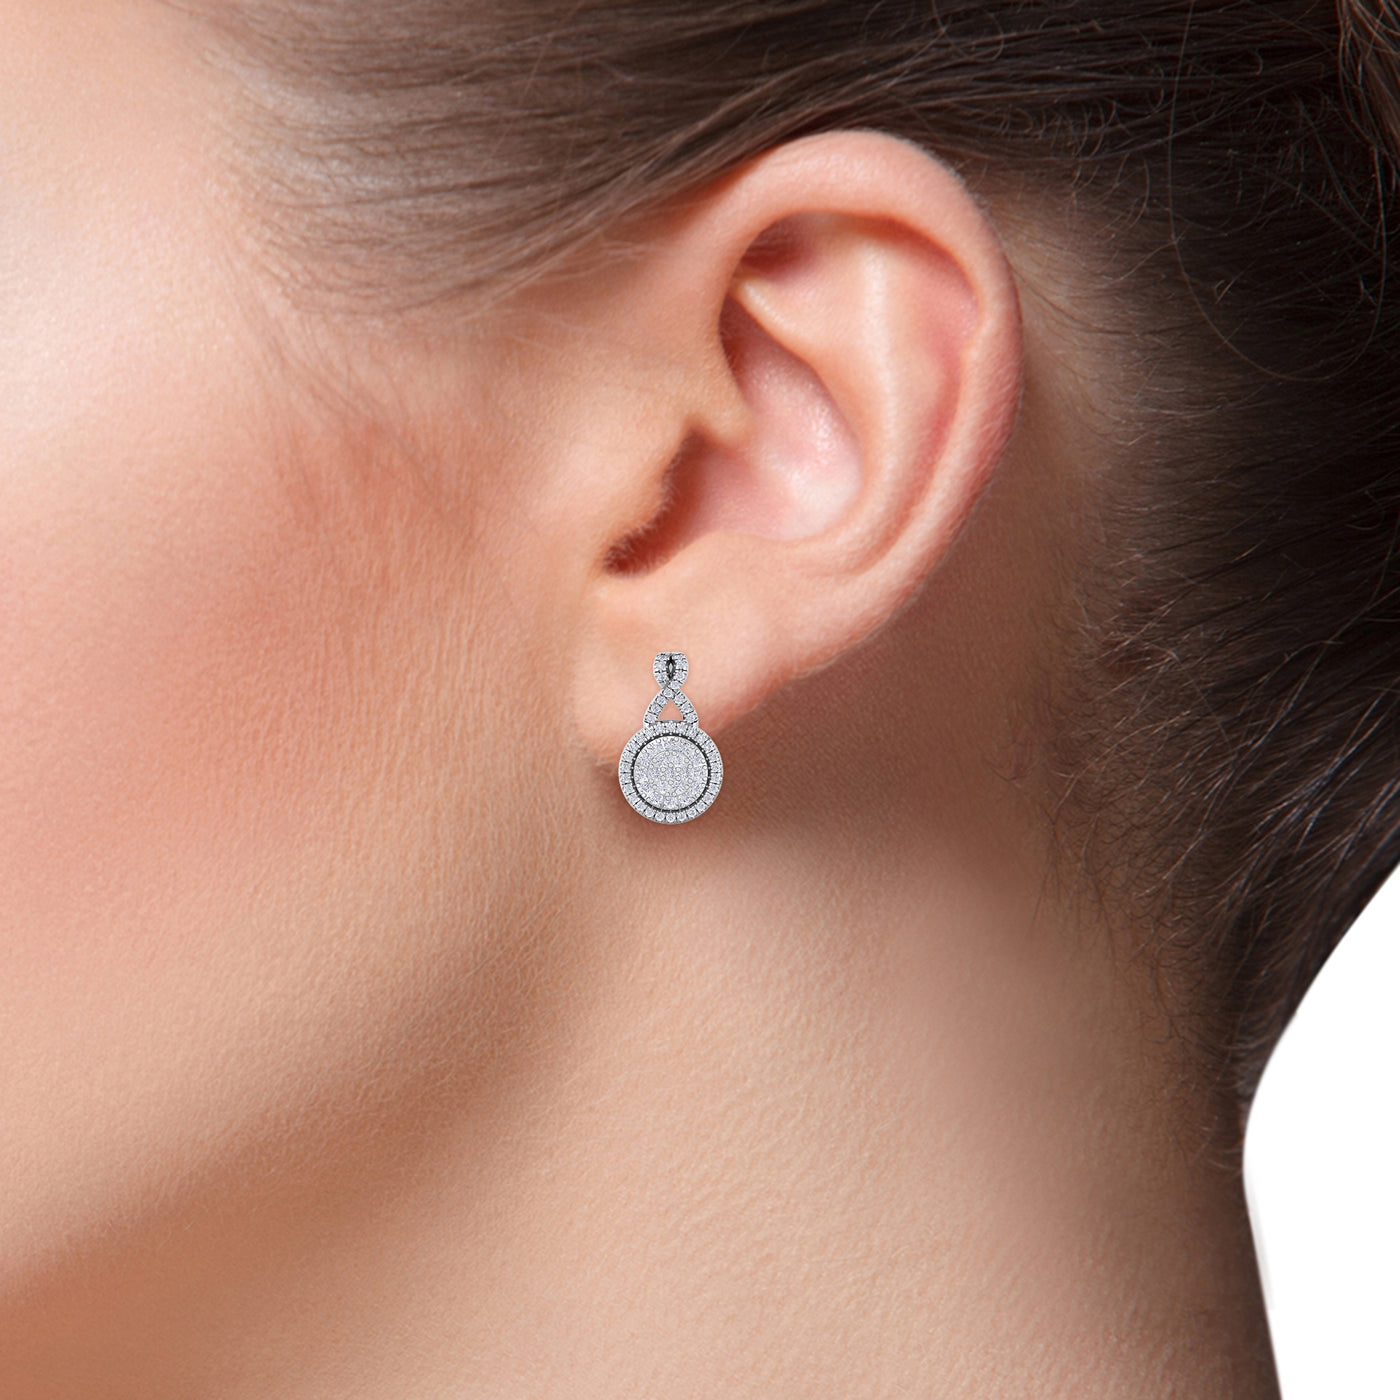 Round earrings in white gold with white diamonds of 0.51 ct in weight - HER DIAMONDS®